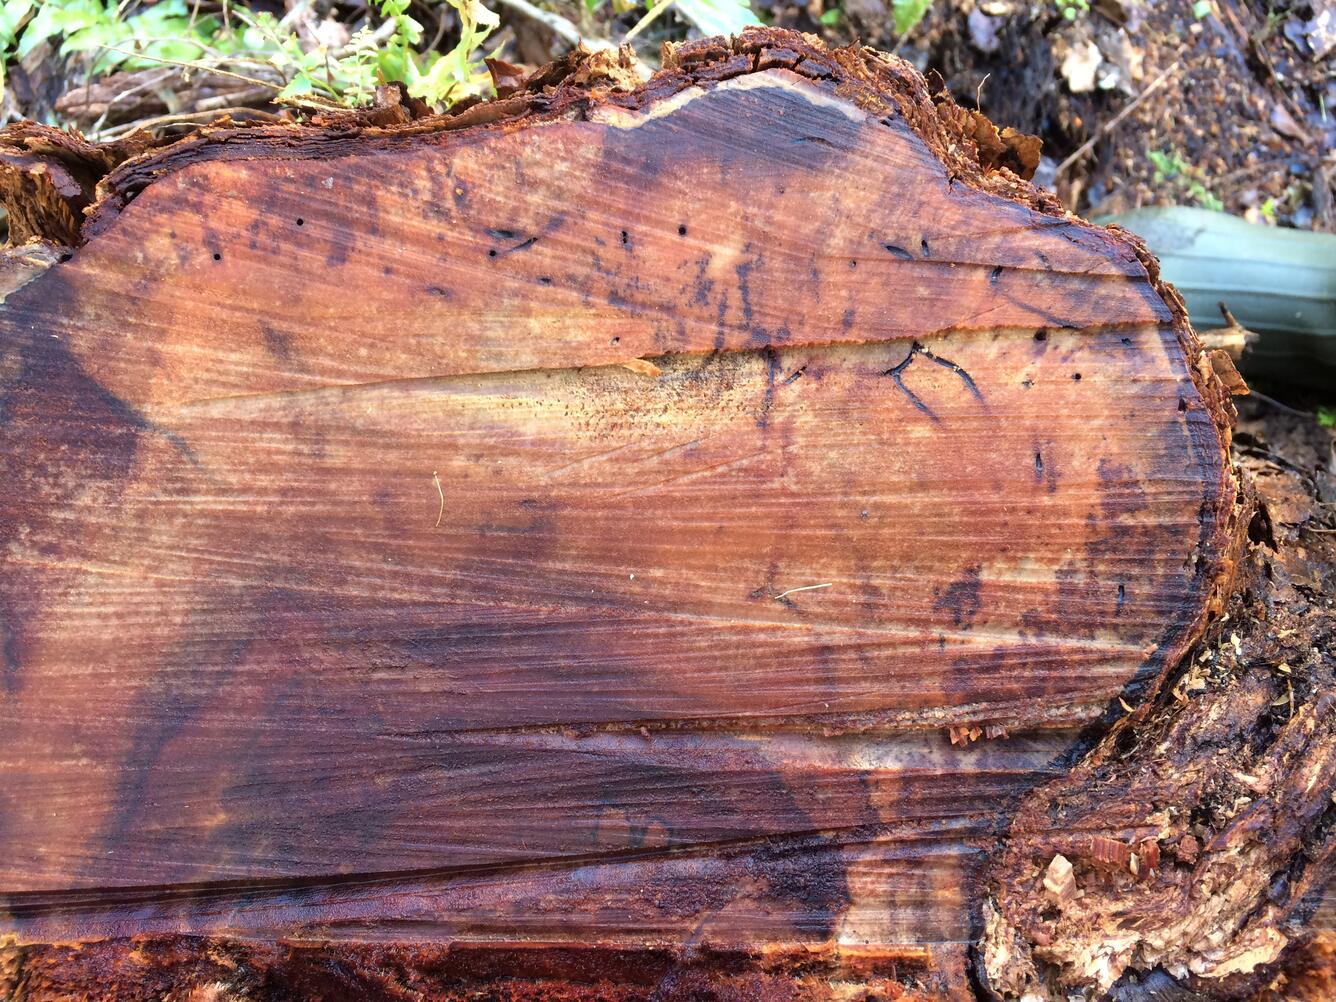 An ohia tree log showing tunnels created by wood boring beetles